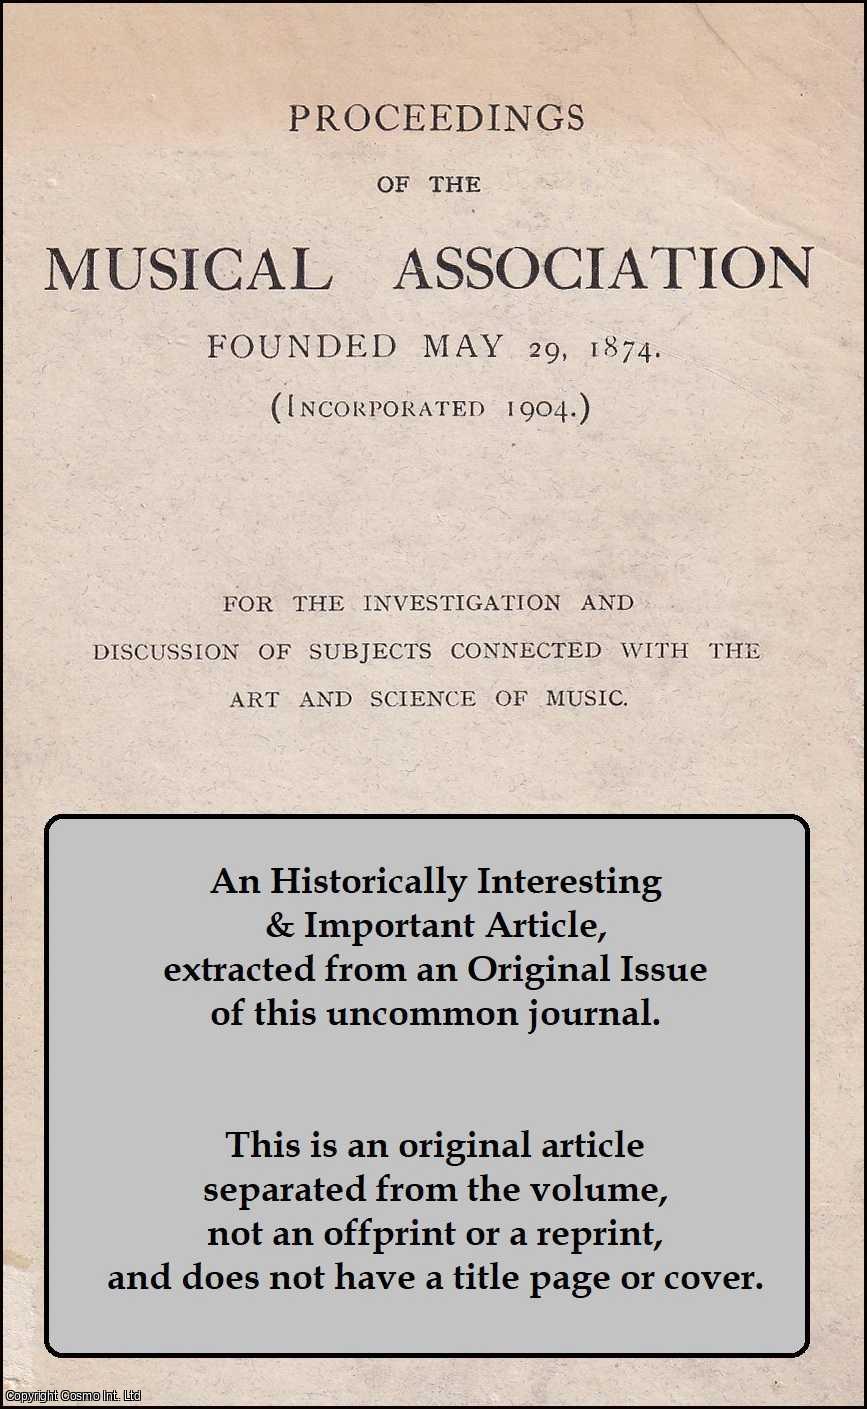 Anselm Hughes - The Eton Manuscript. An original article from The Proceedings of The Musical Association, 1927.